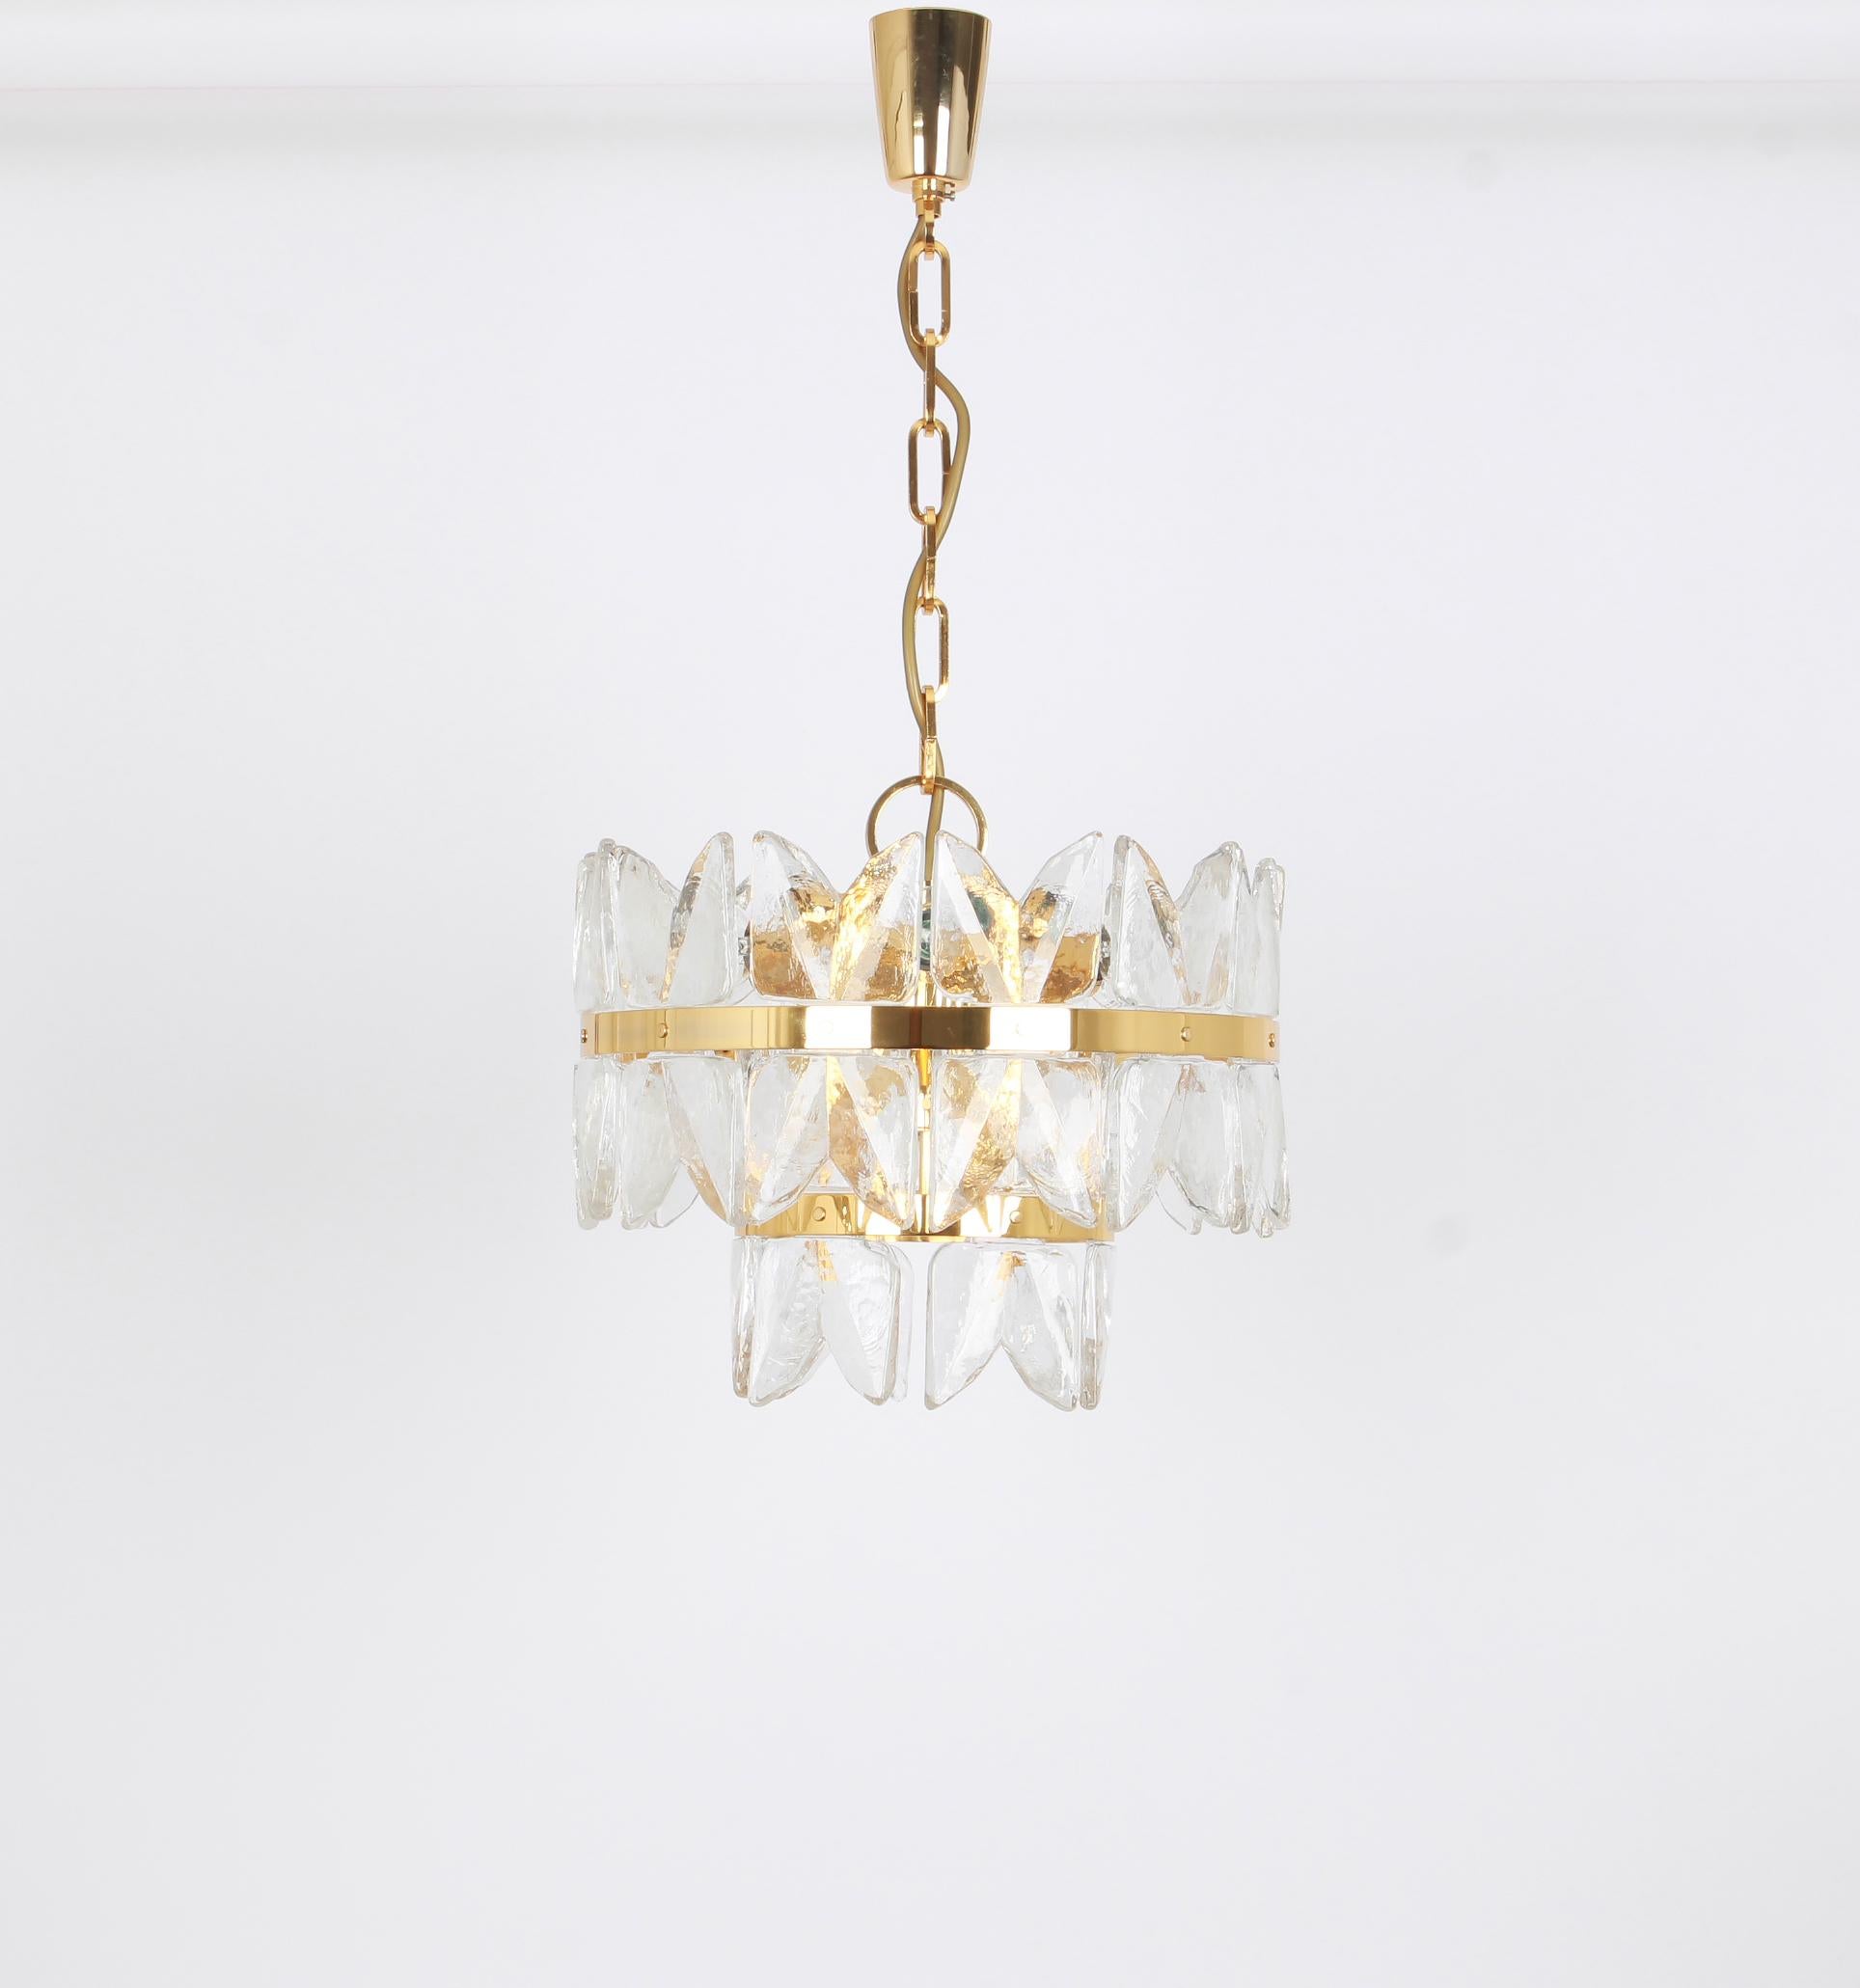 A wonderful gilt brass light fixture made by Kalmar (Series: Corina), Austria, manufactured, circa 1970-1979.
Three tiers structure gathering many structured polished crystal glass pieces, beautifully refracting the light very heavy